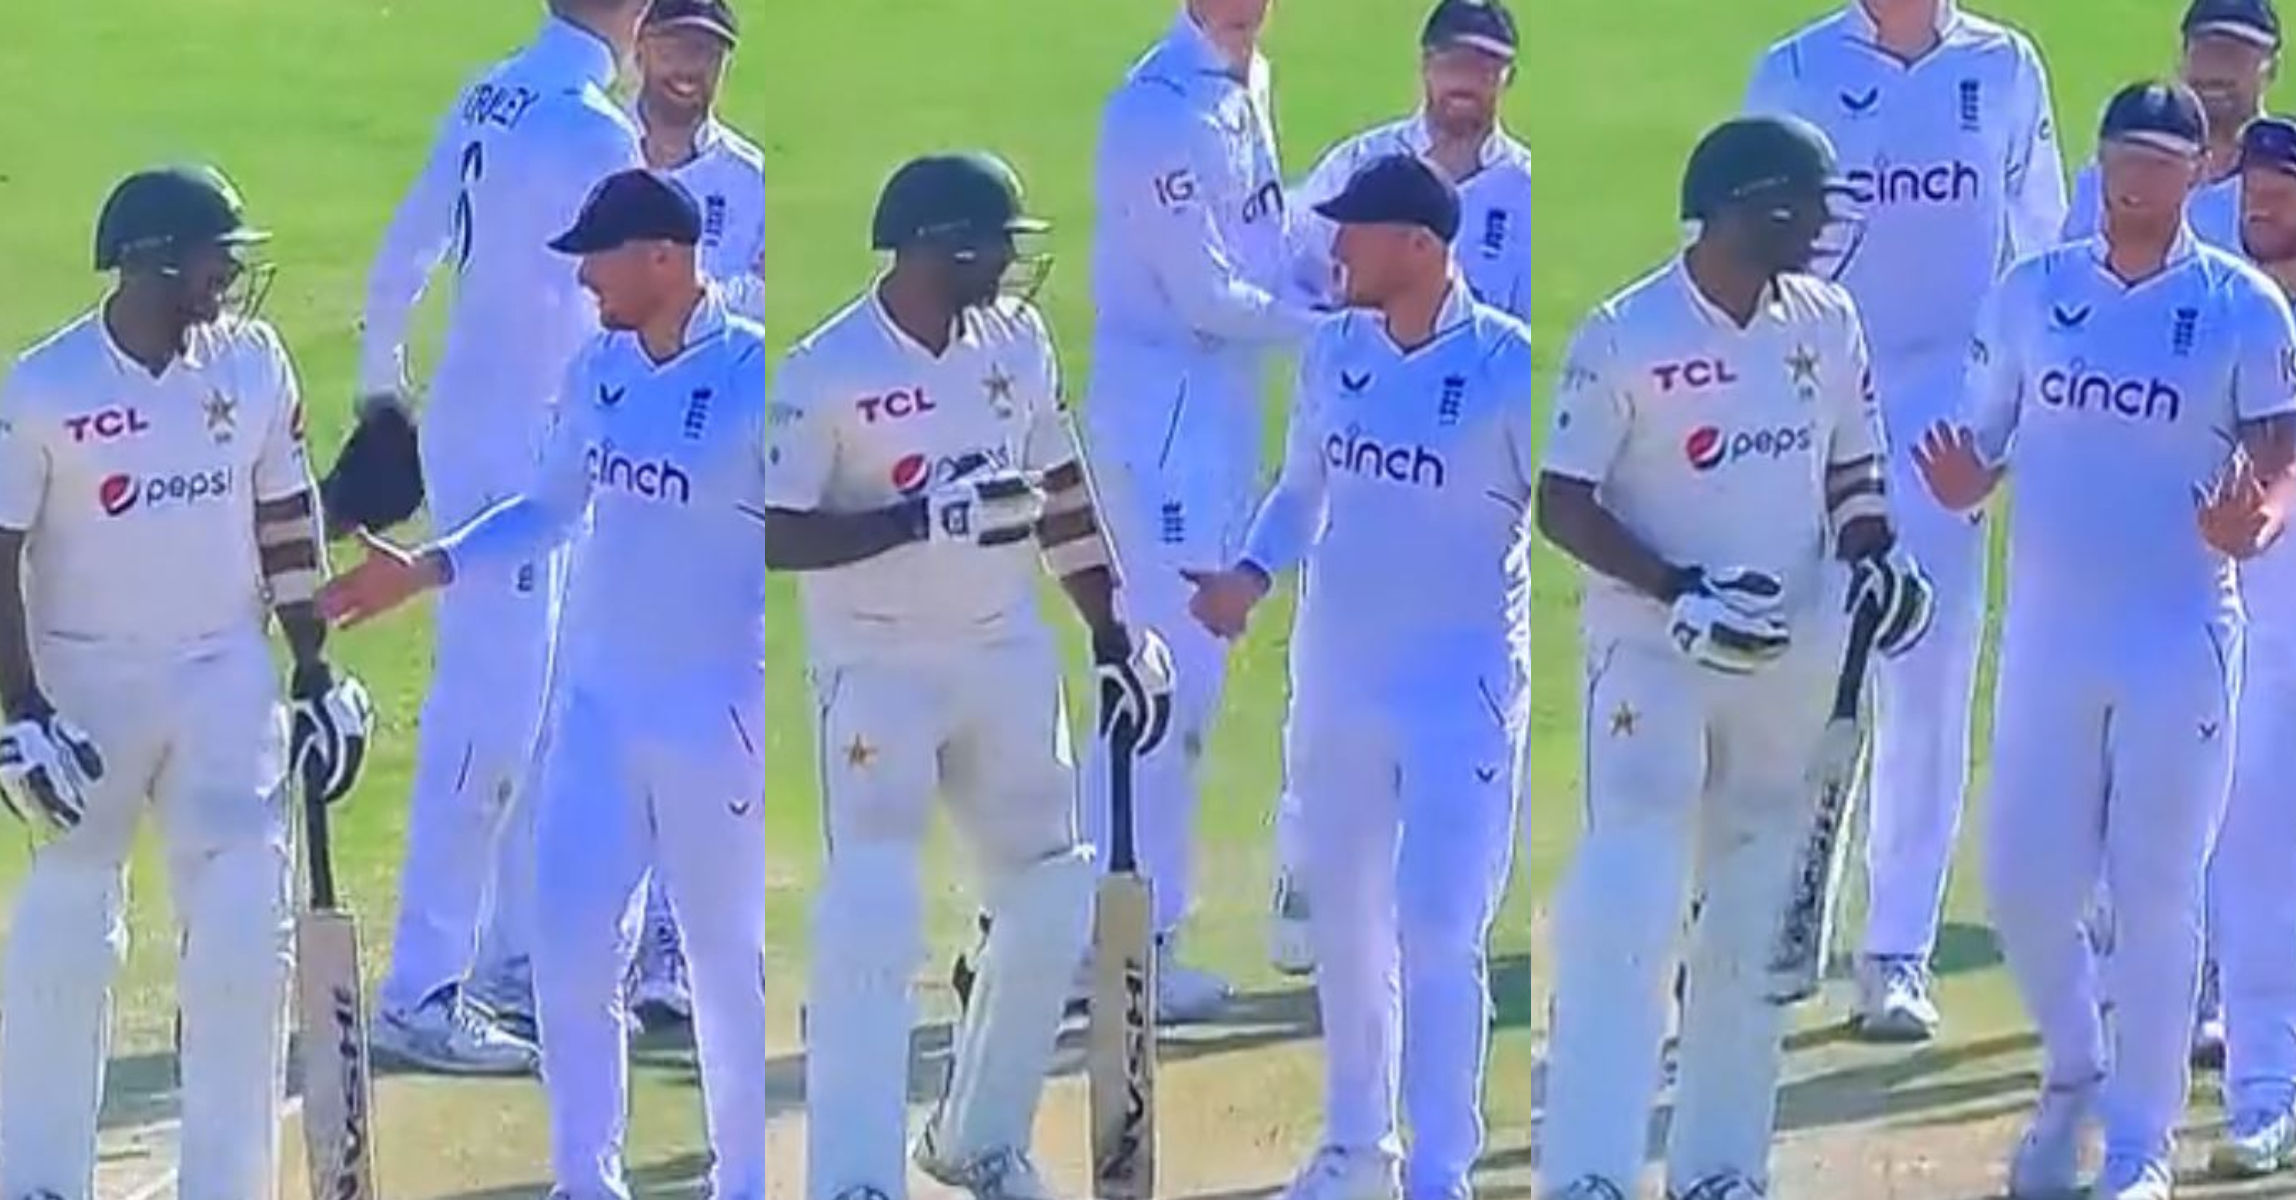 Stokes backed off after Ali refused to shake hands before the DRS decision was up on screen | Twitter